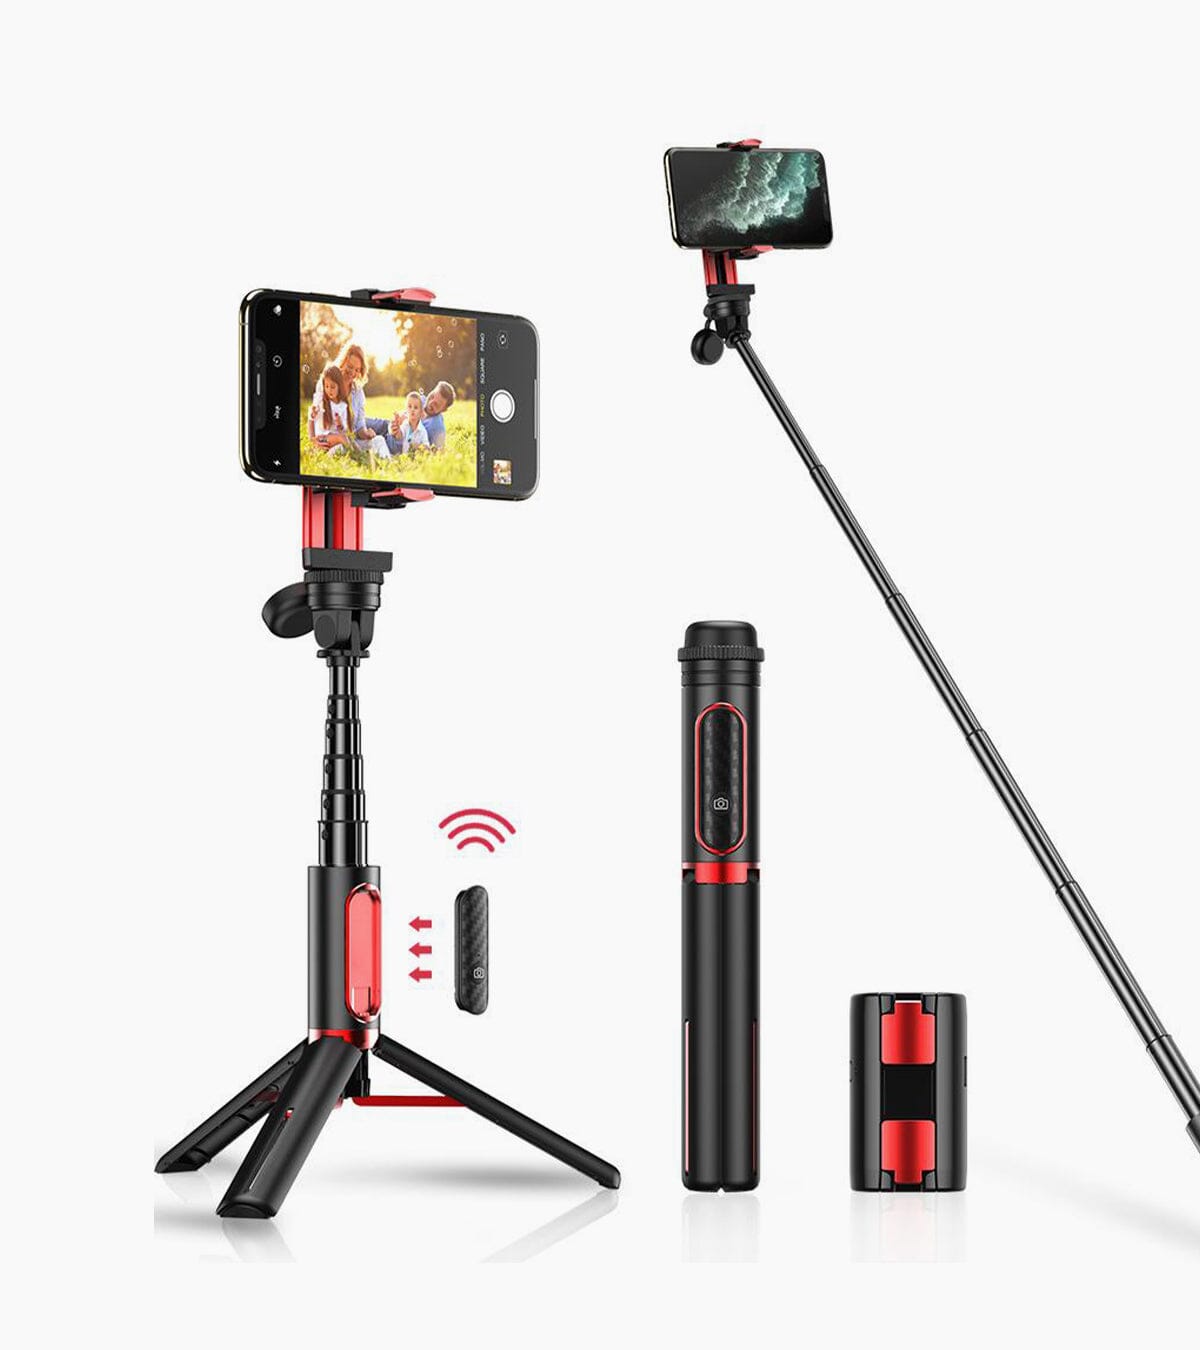 D8 Extendable Phone Selfie Stick Gimbal Stabilizer Mobile Photography Accessories APEXEL 